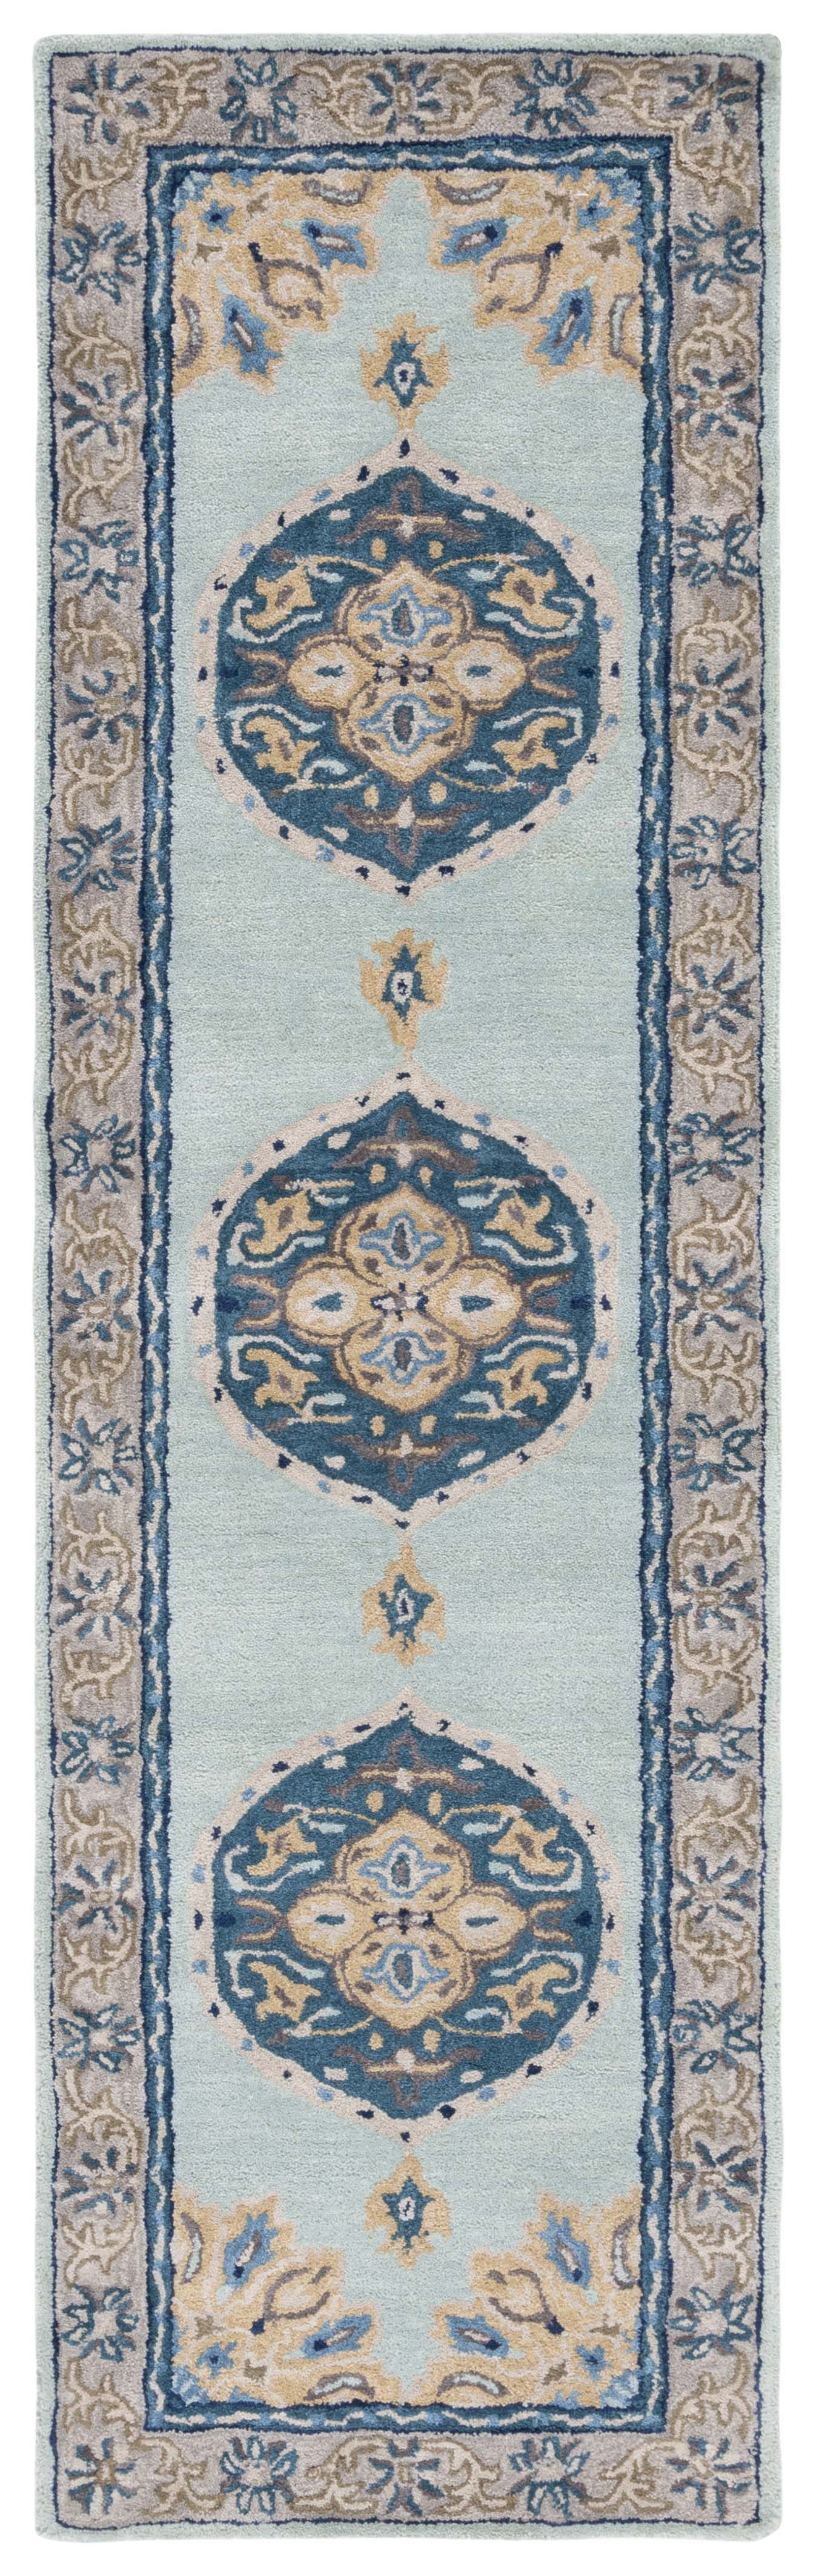 Safavieh Antiquity At66K Turquoise/Silver Area Rug